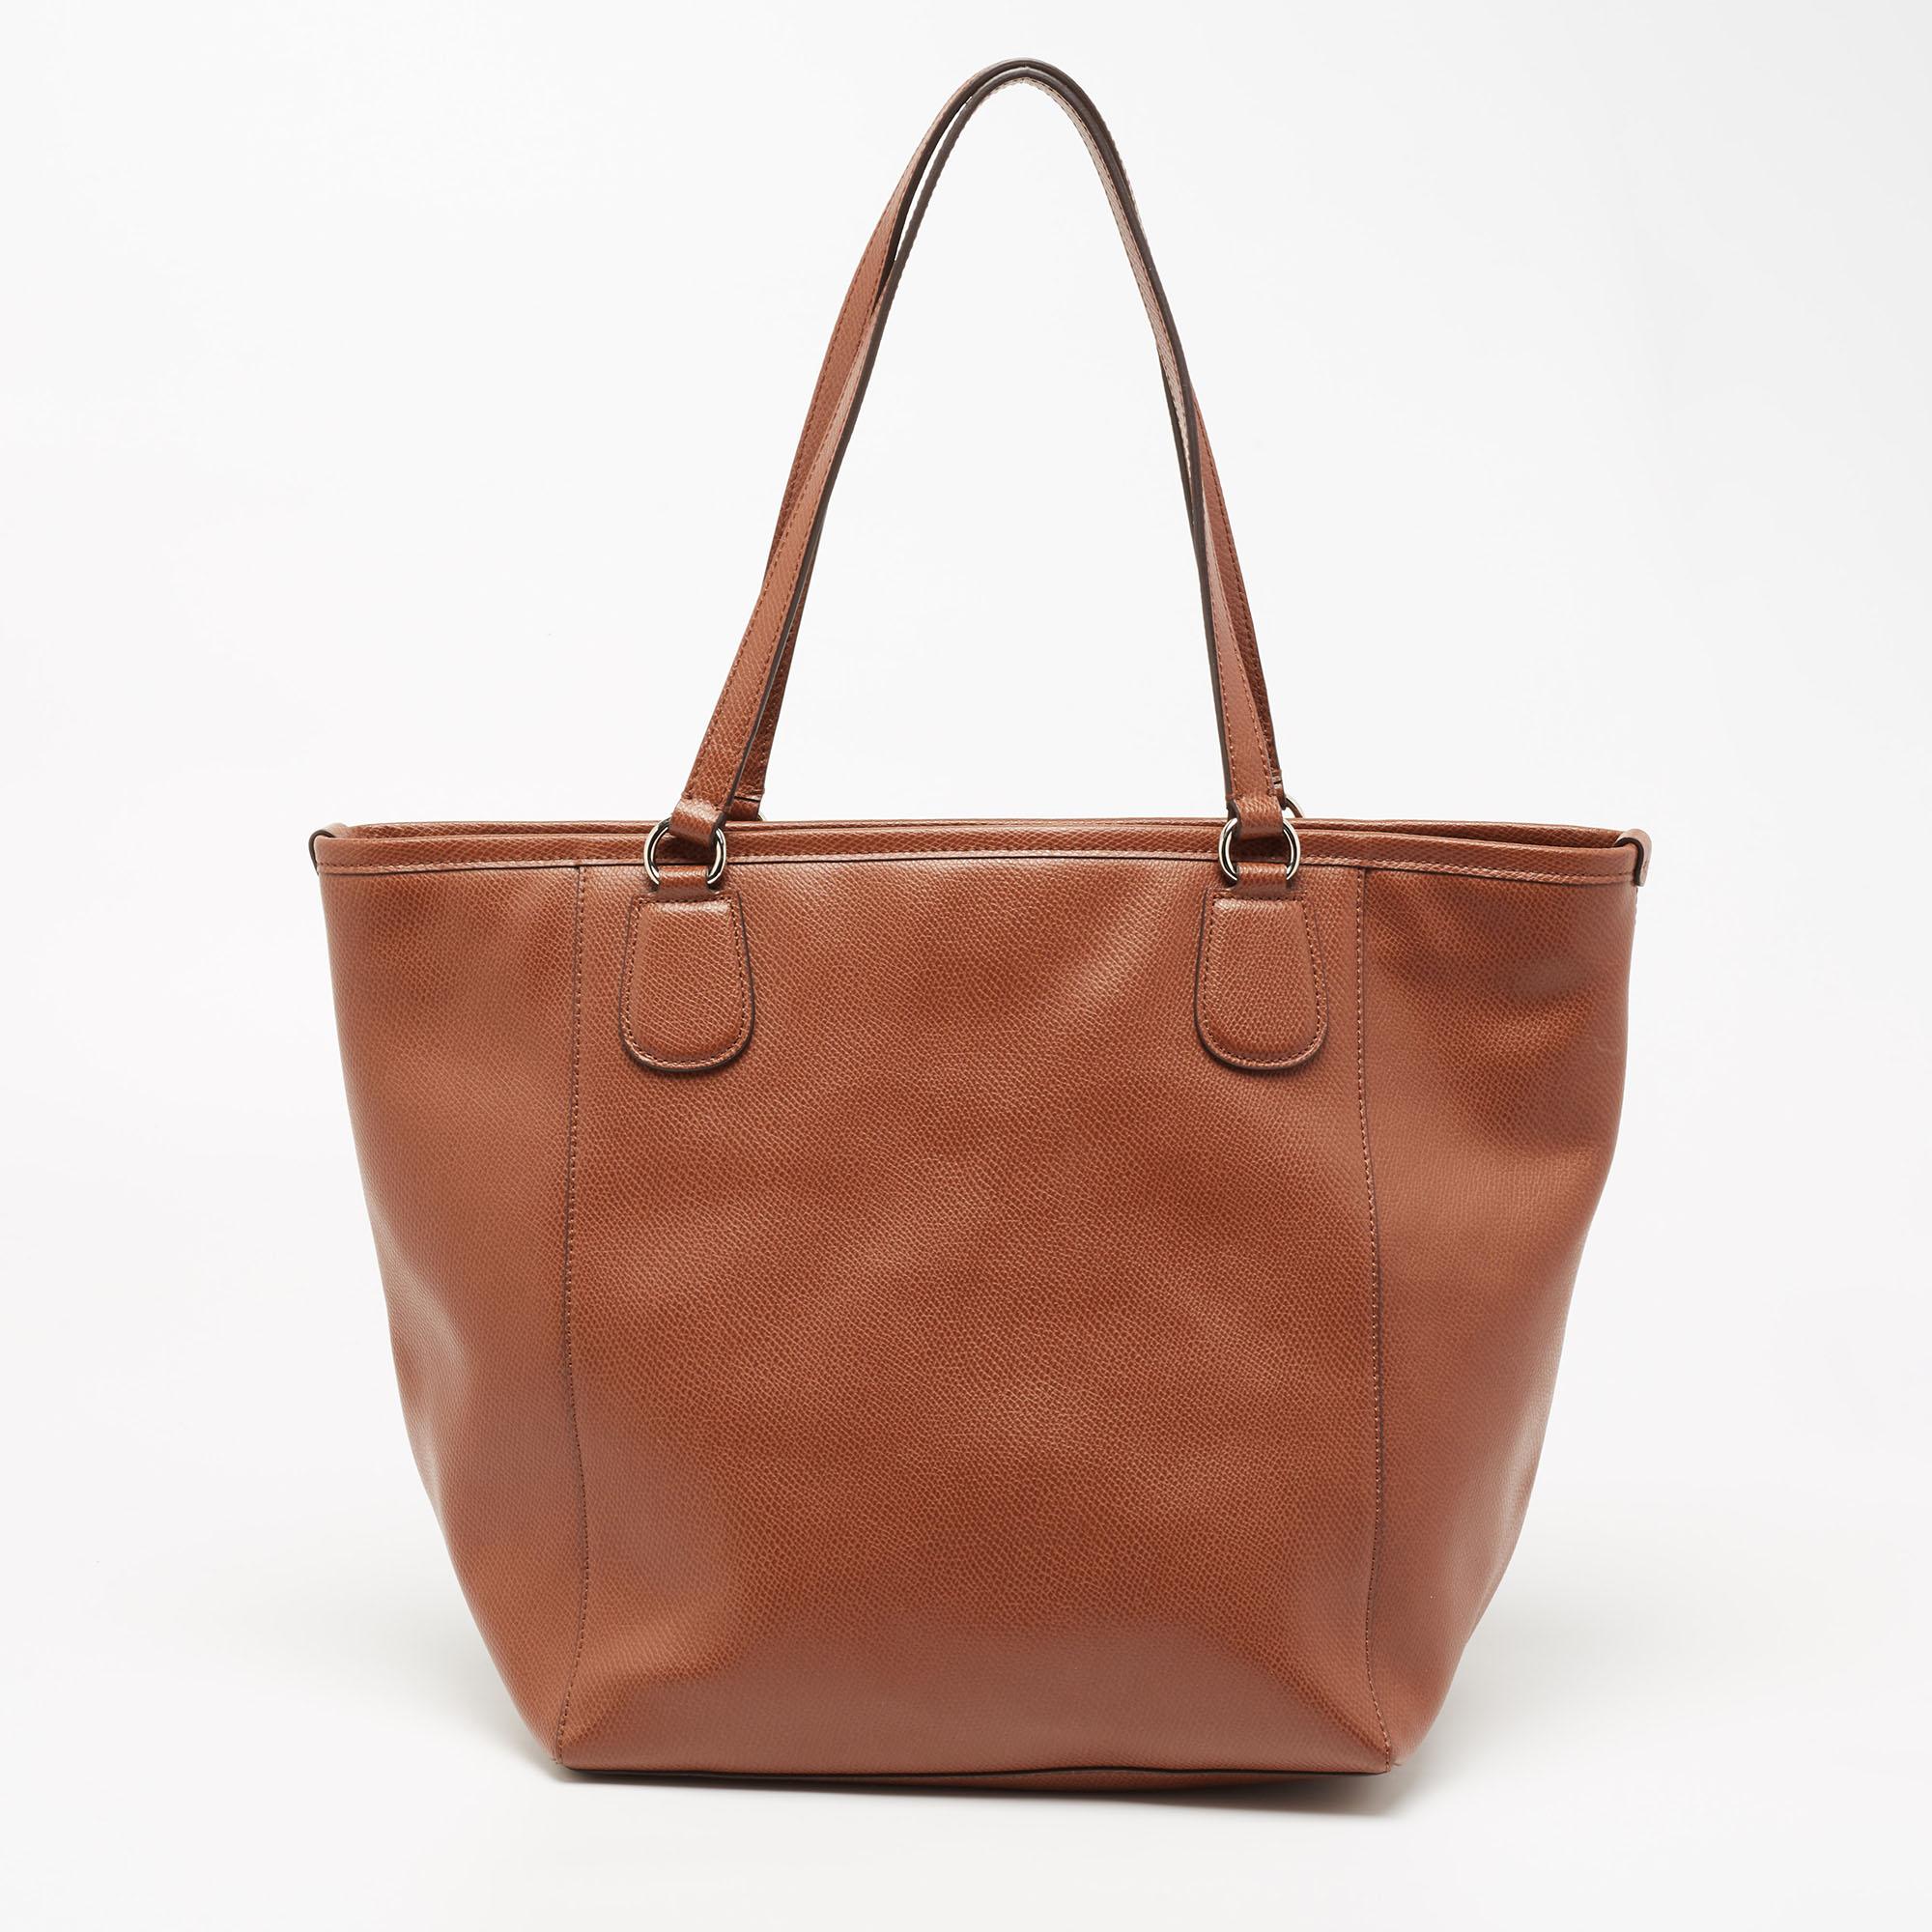 This designer tote from the House of Coach is super classy and functional, perfect for everyday use. It is made from leather and the exterior has a front zip pocket. It has two shoulder handles.

